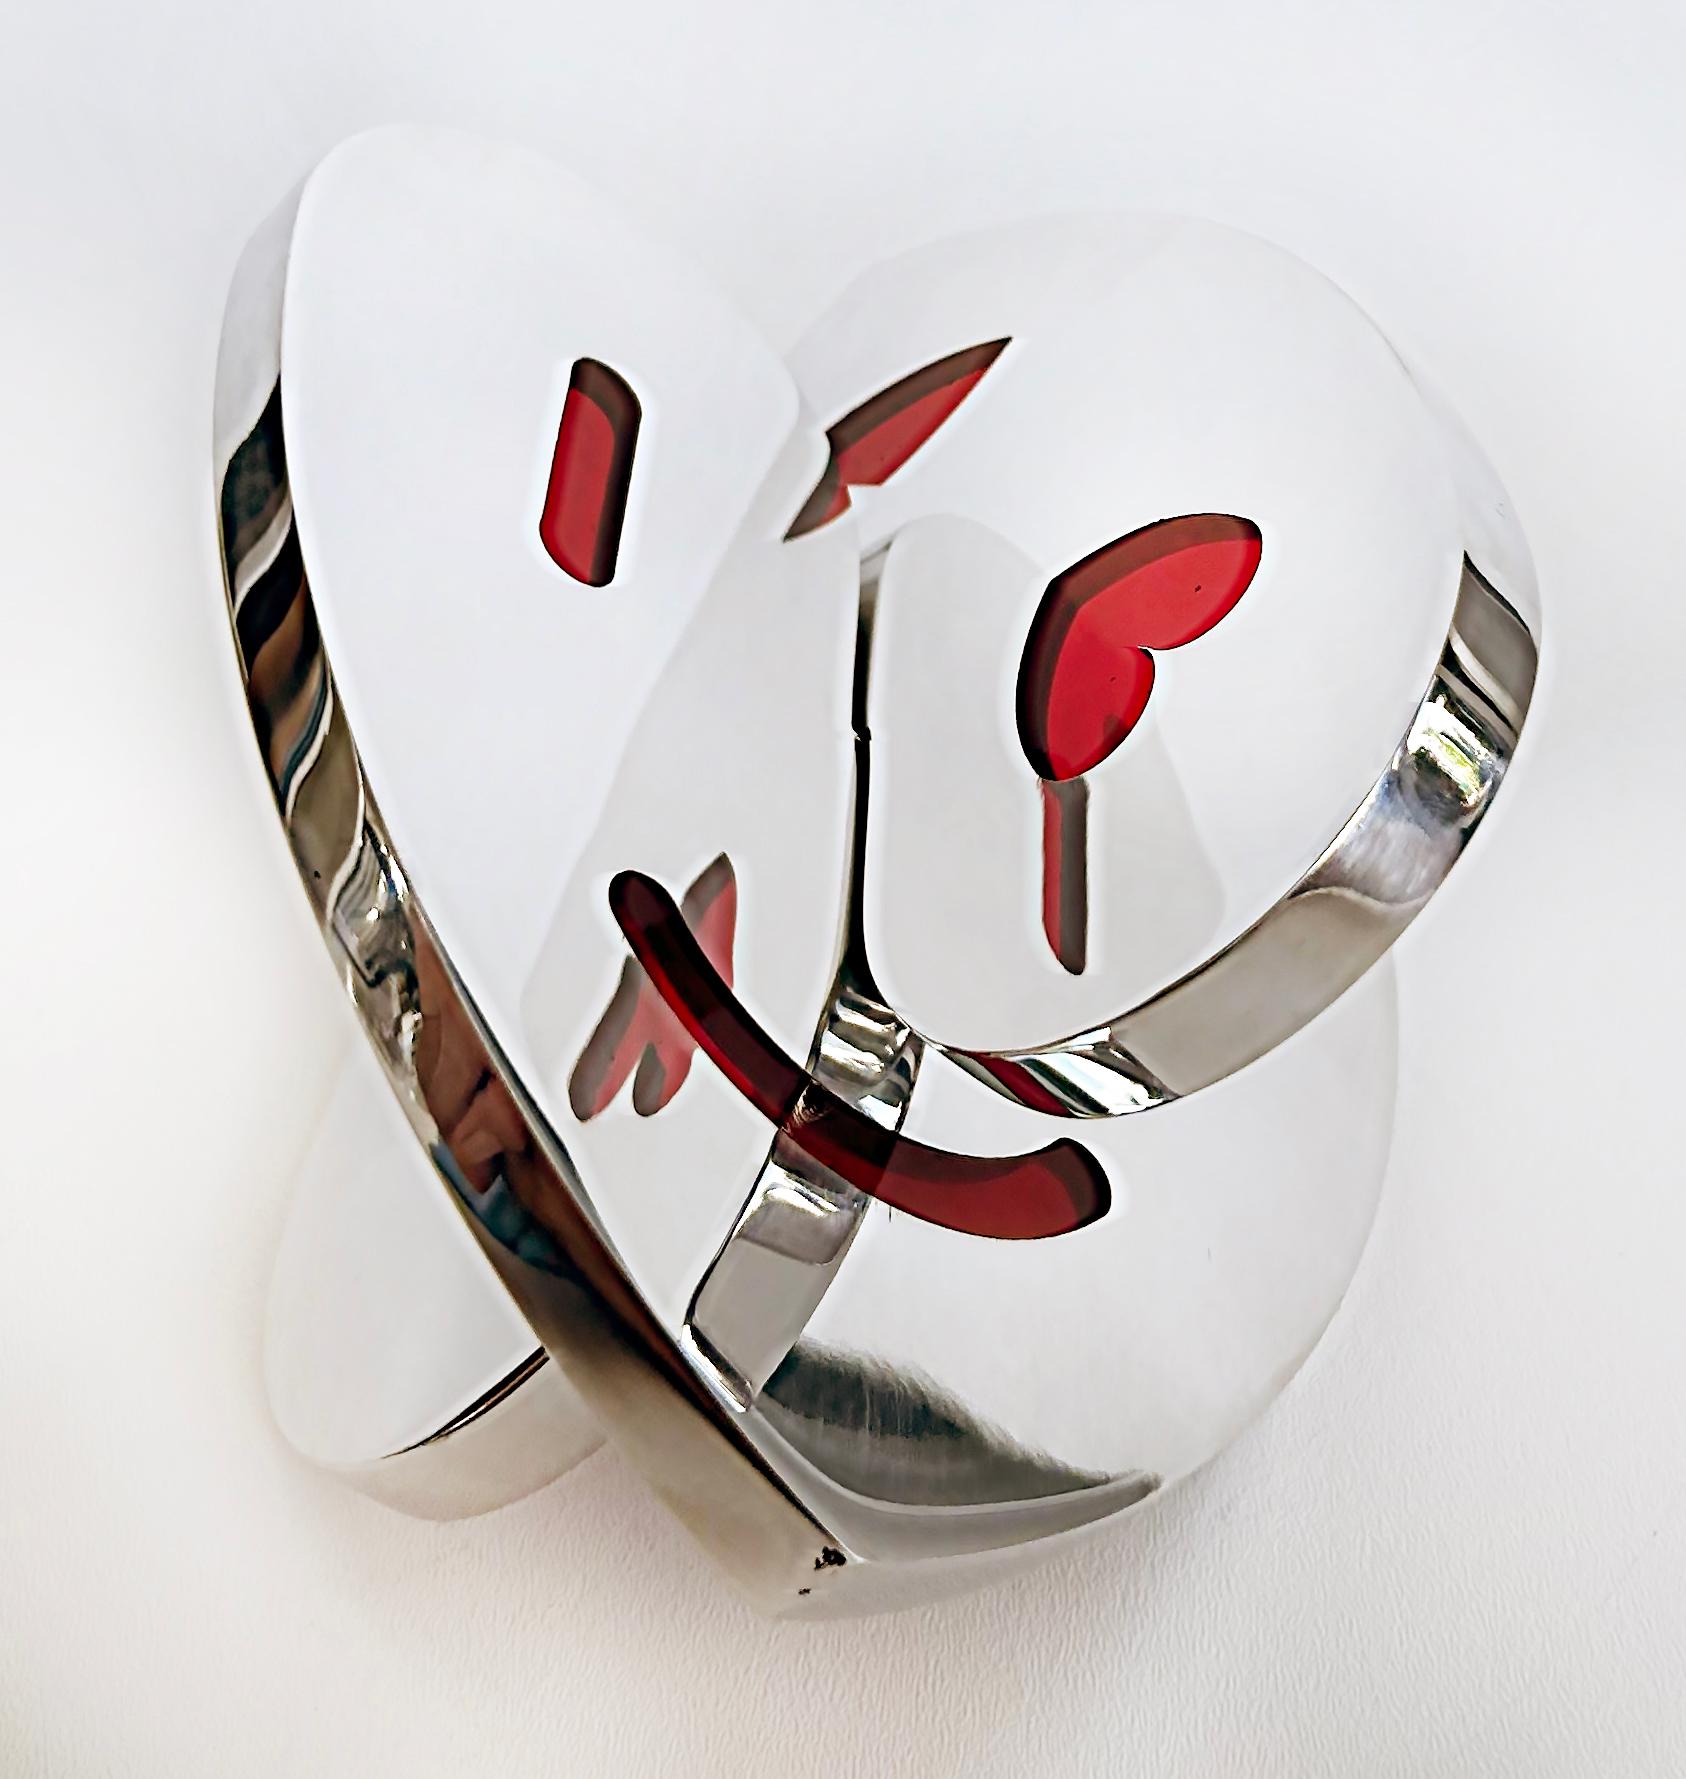 Polished Aluminum Interlocking Hearts Sculpture with Translucent Epoxy Resin In New Condition For Sale In Miami, FL